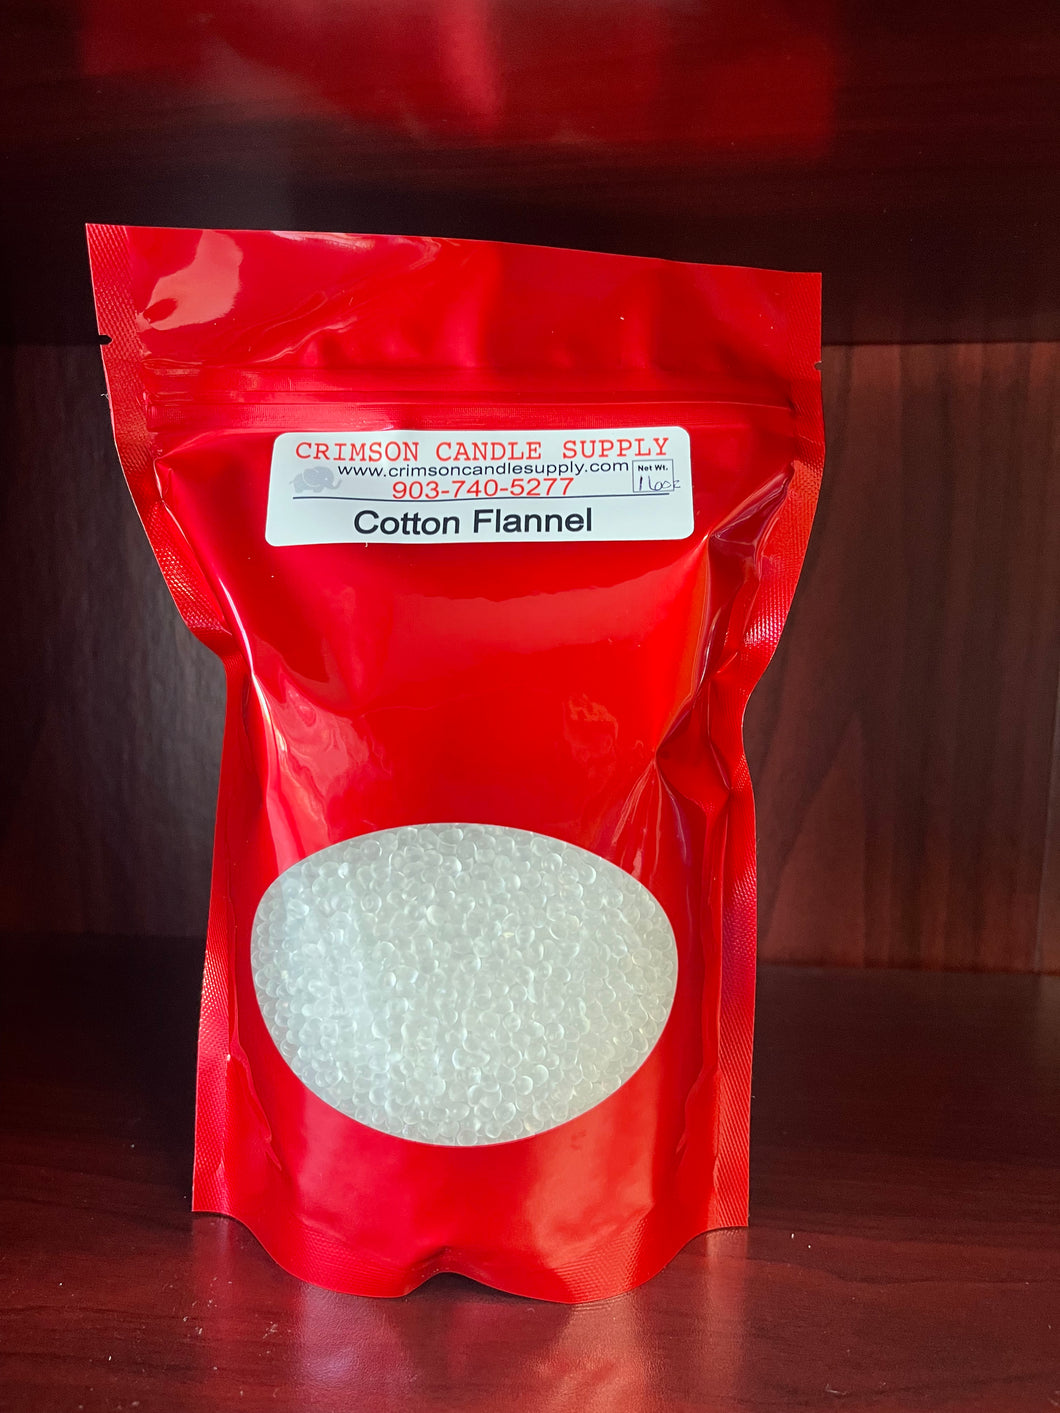 Cotton Flannel Scented Aroma Beads 16 oz. Bag